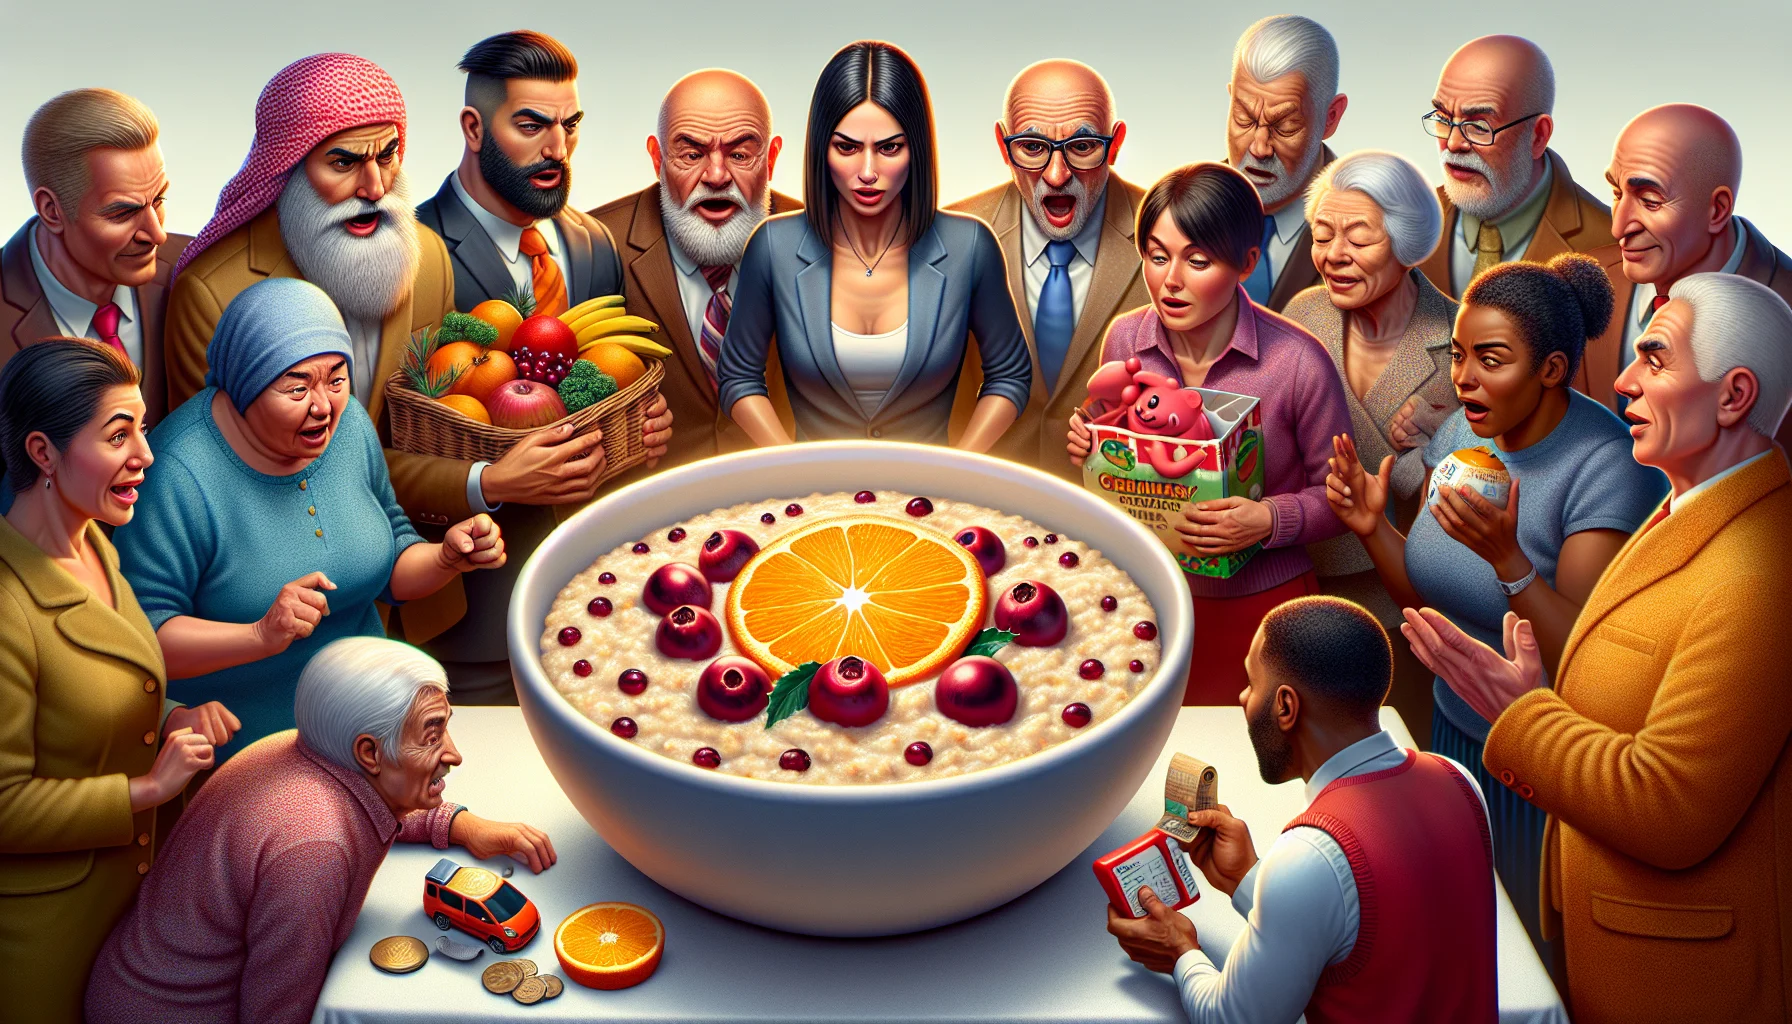 Create a highly detailed and realistic image showcasing a bowl of Cranberry Orange Christmas Oatmeal in a comical scenario. The oatmeal is glowing with an appetizing allure, drawing in a diverse group of individuals around it. These include a curious Middle-Eastern man in business attire, a Caucasian woman decked out in gym clothes, a Hispanic senior citizen with a shopping basket of fruits, a Black woman holding a piggybank, and an Asian child with a toy car, all leaning towards the oatmeal. Their expressions are filled with amazement as if the oatmeal is the solution to their quest for affordable healthy eating.